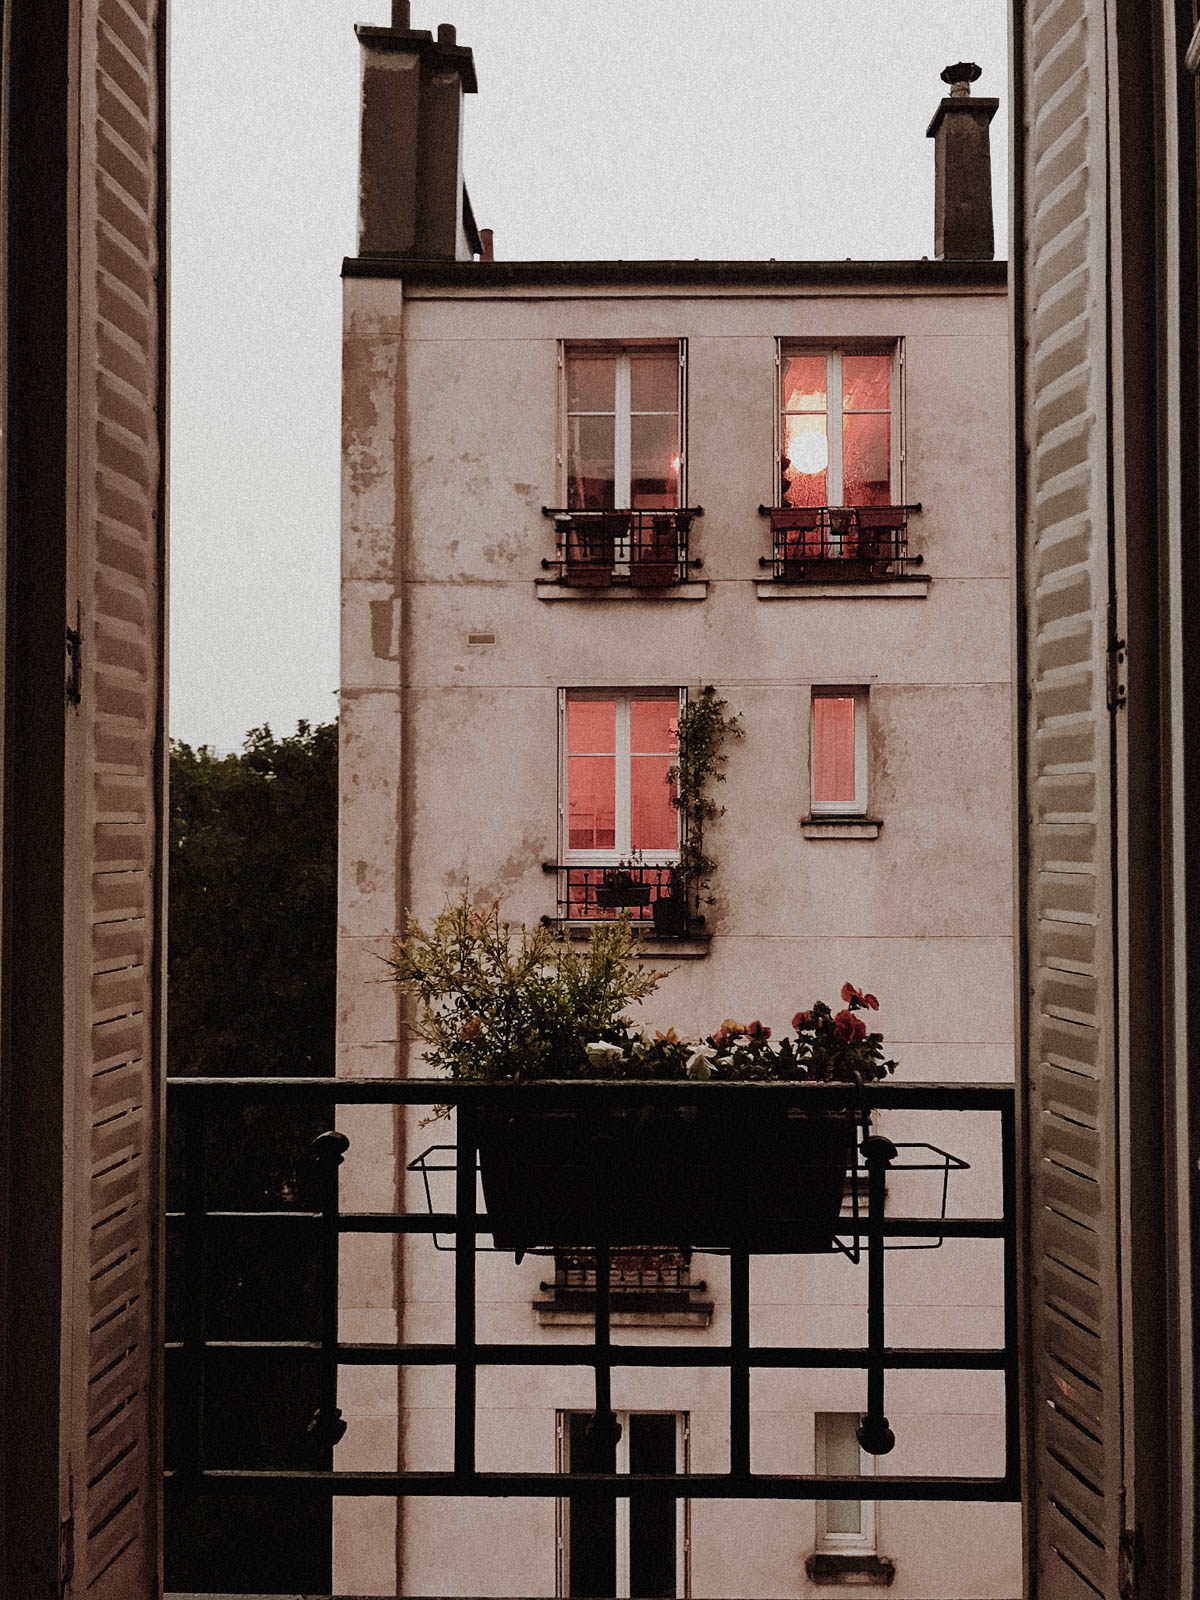 Paris France Travel Guide - Window View, European Architecture and Buildings / RG Daily Blog